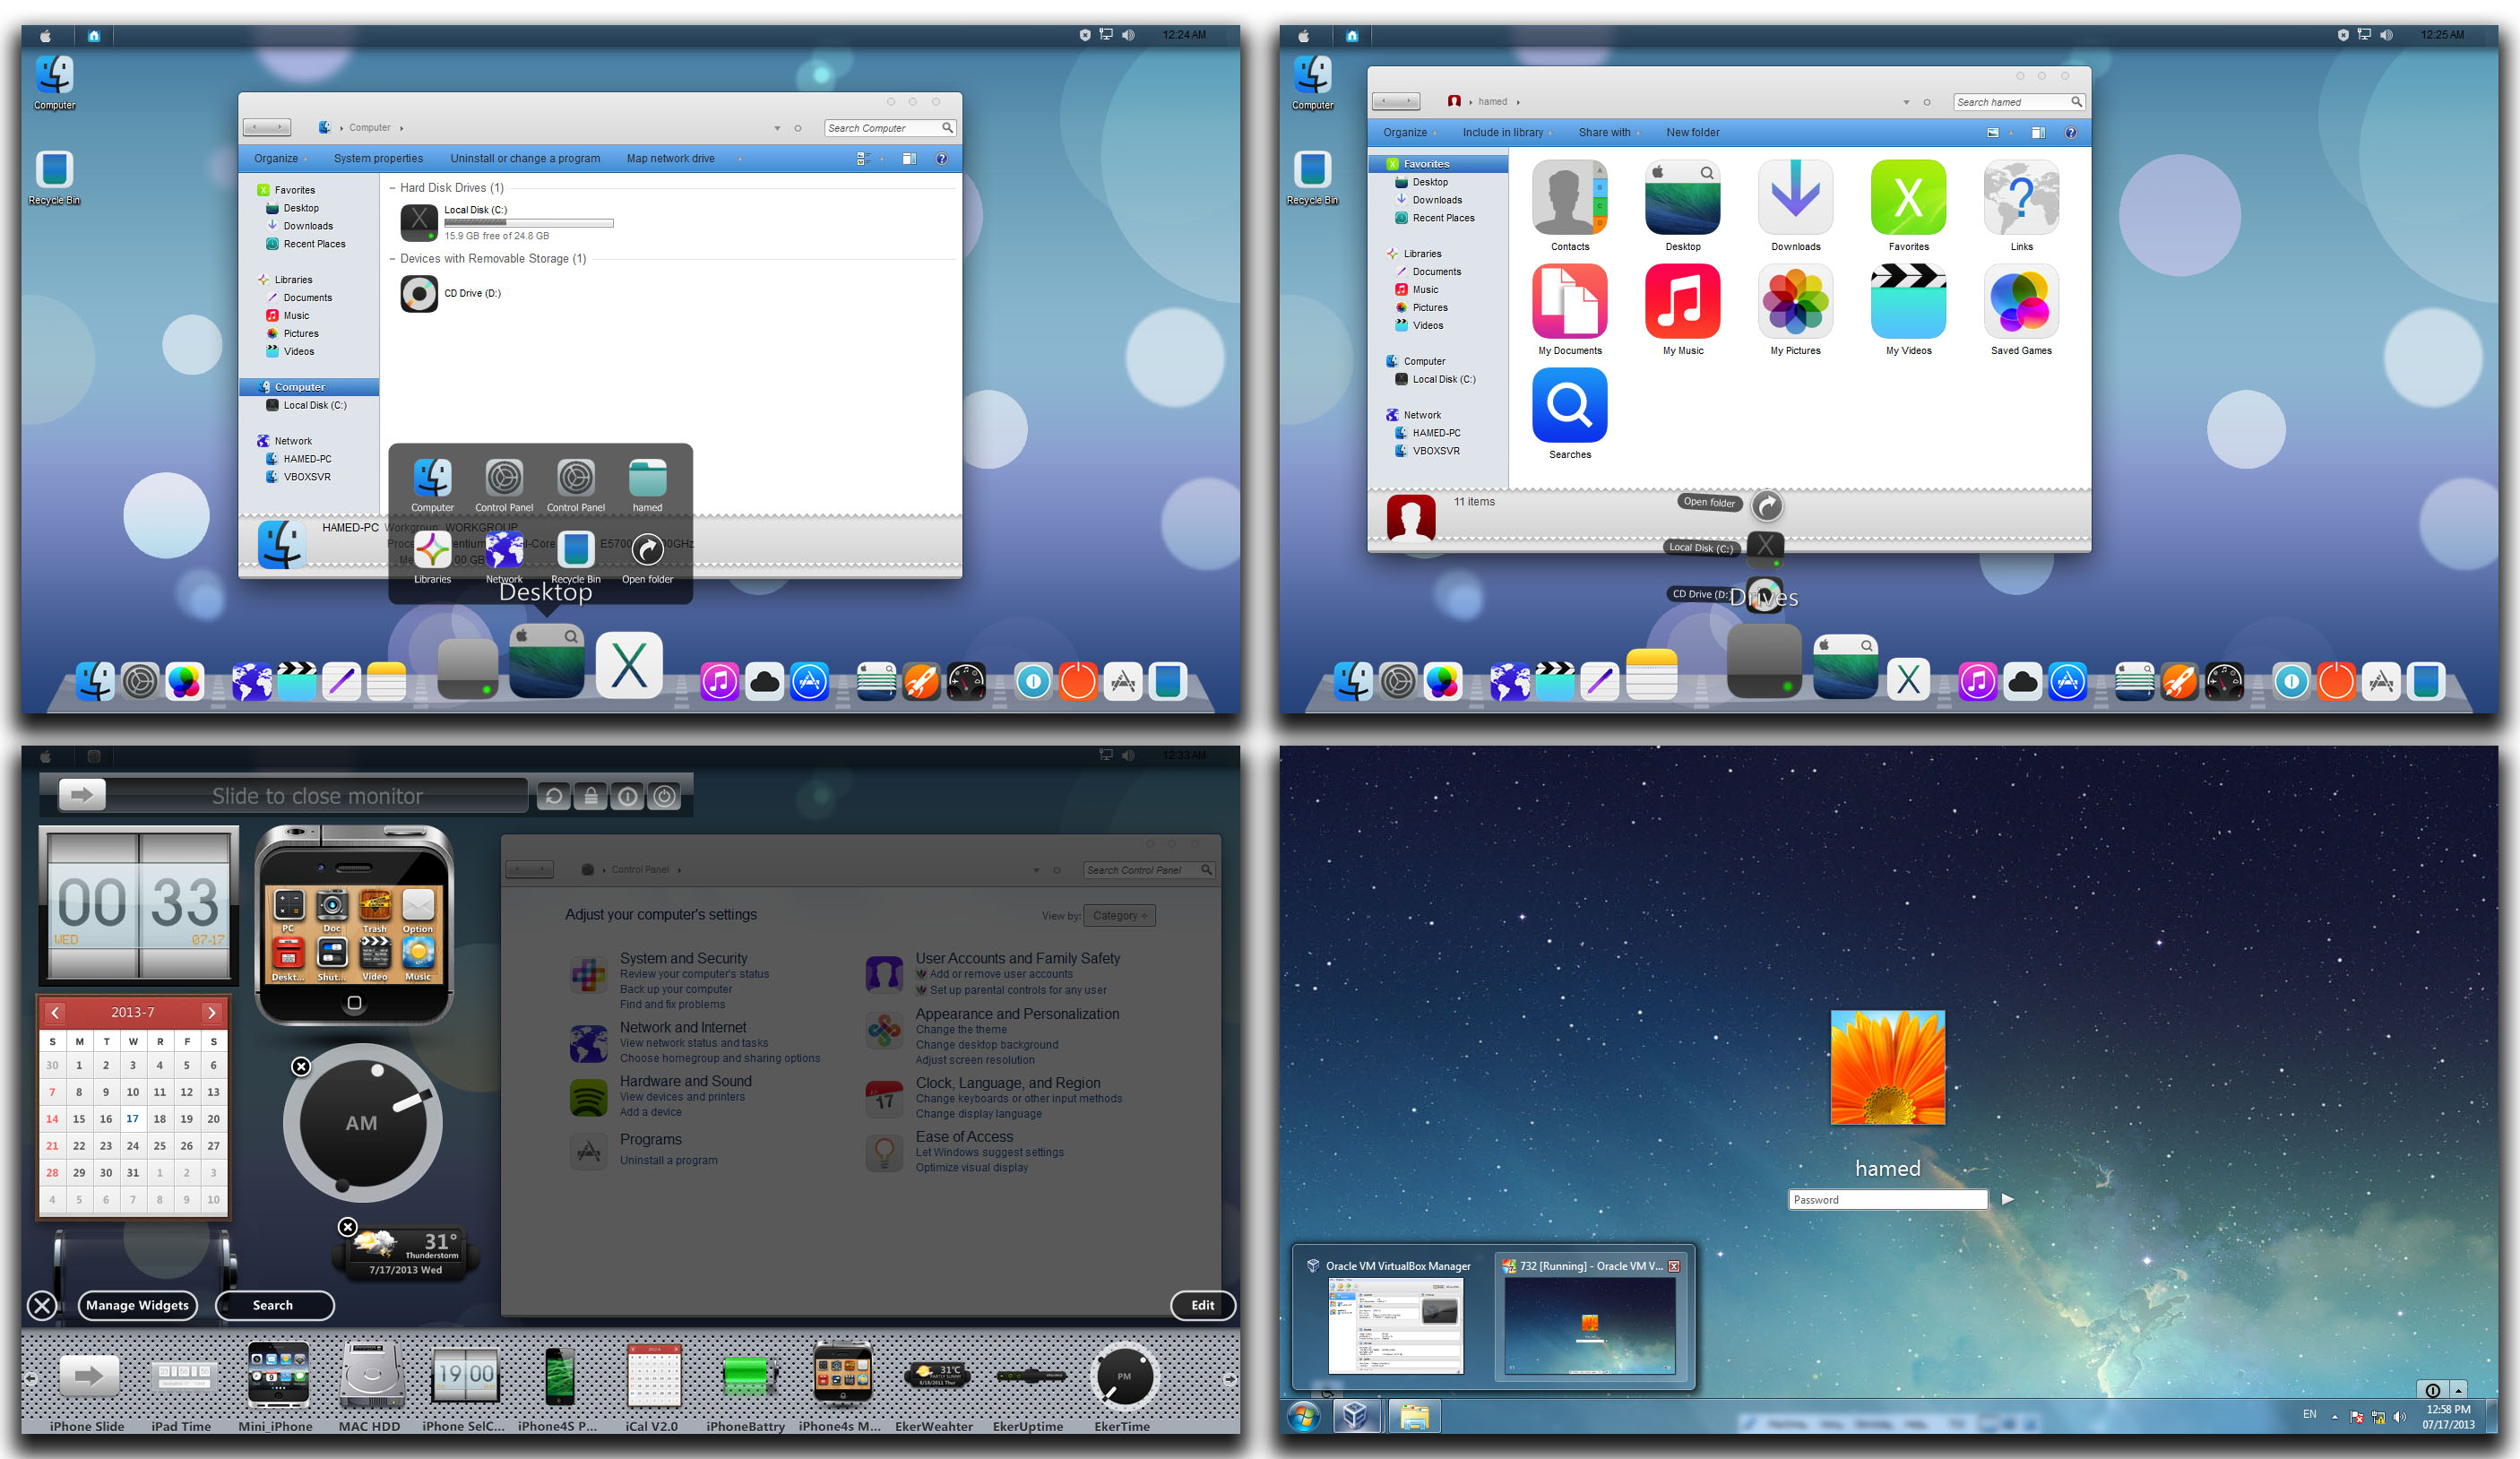 iOS7 Skin Pack for Win8 released